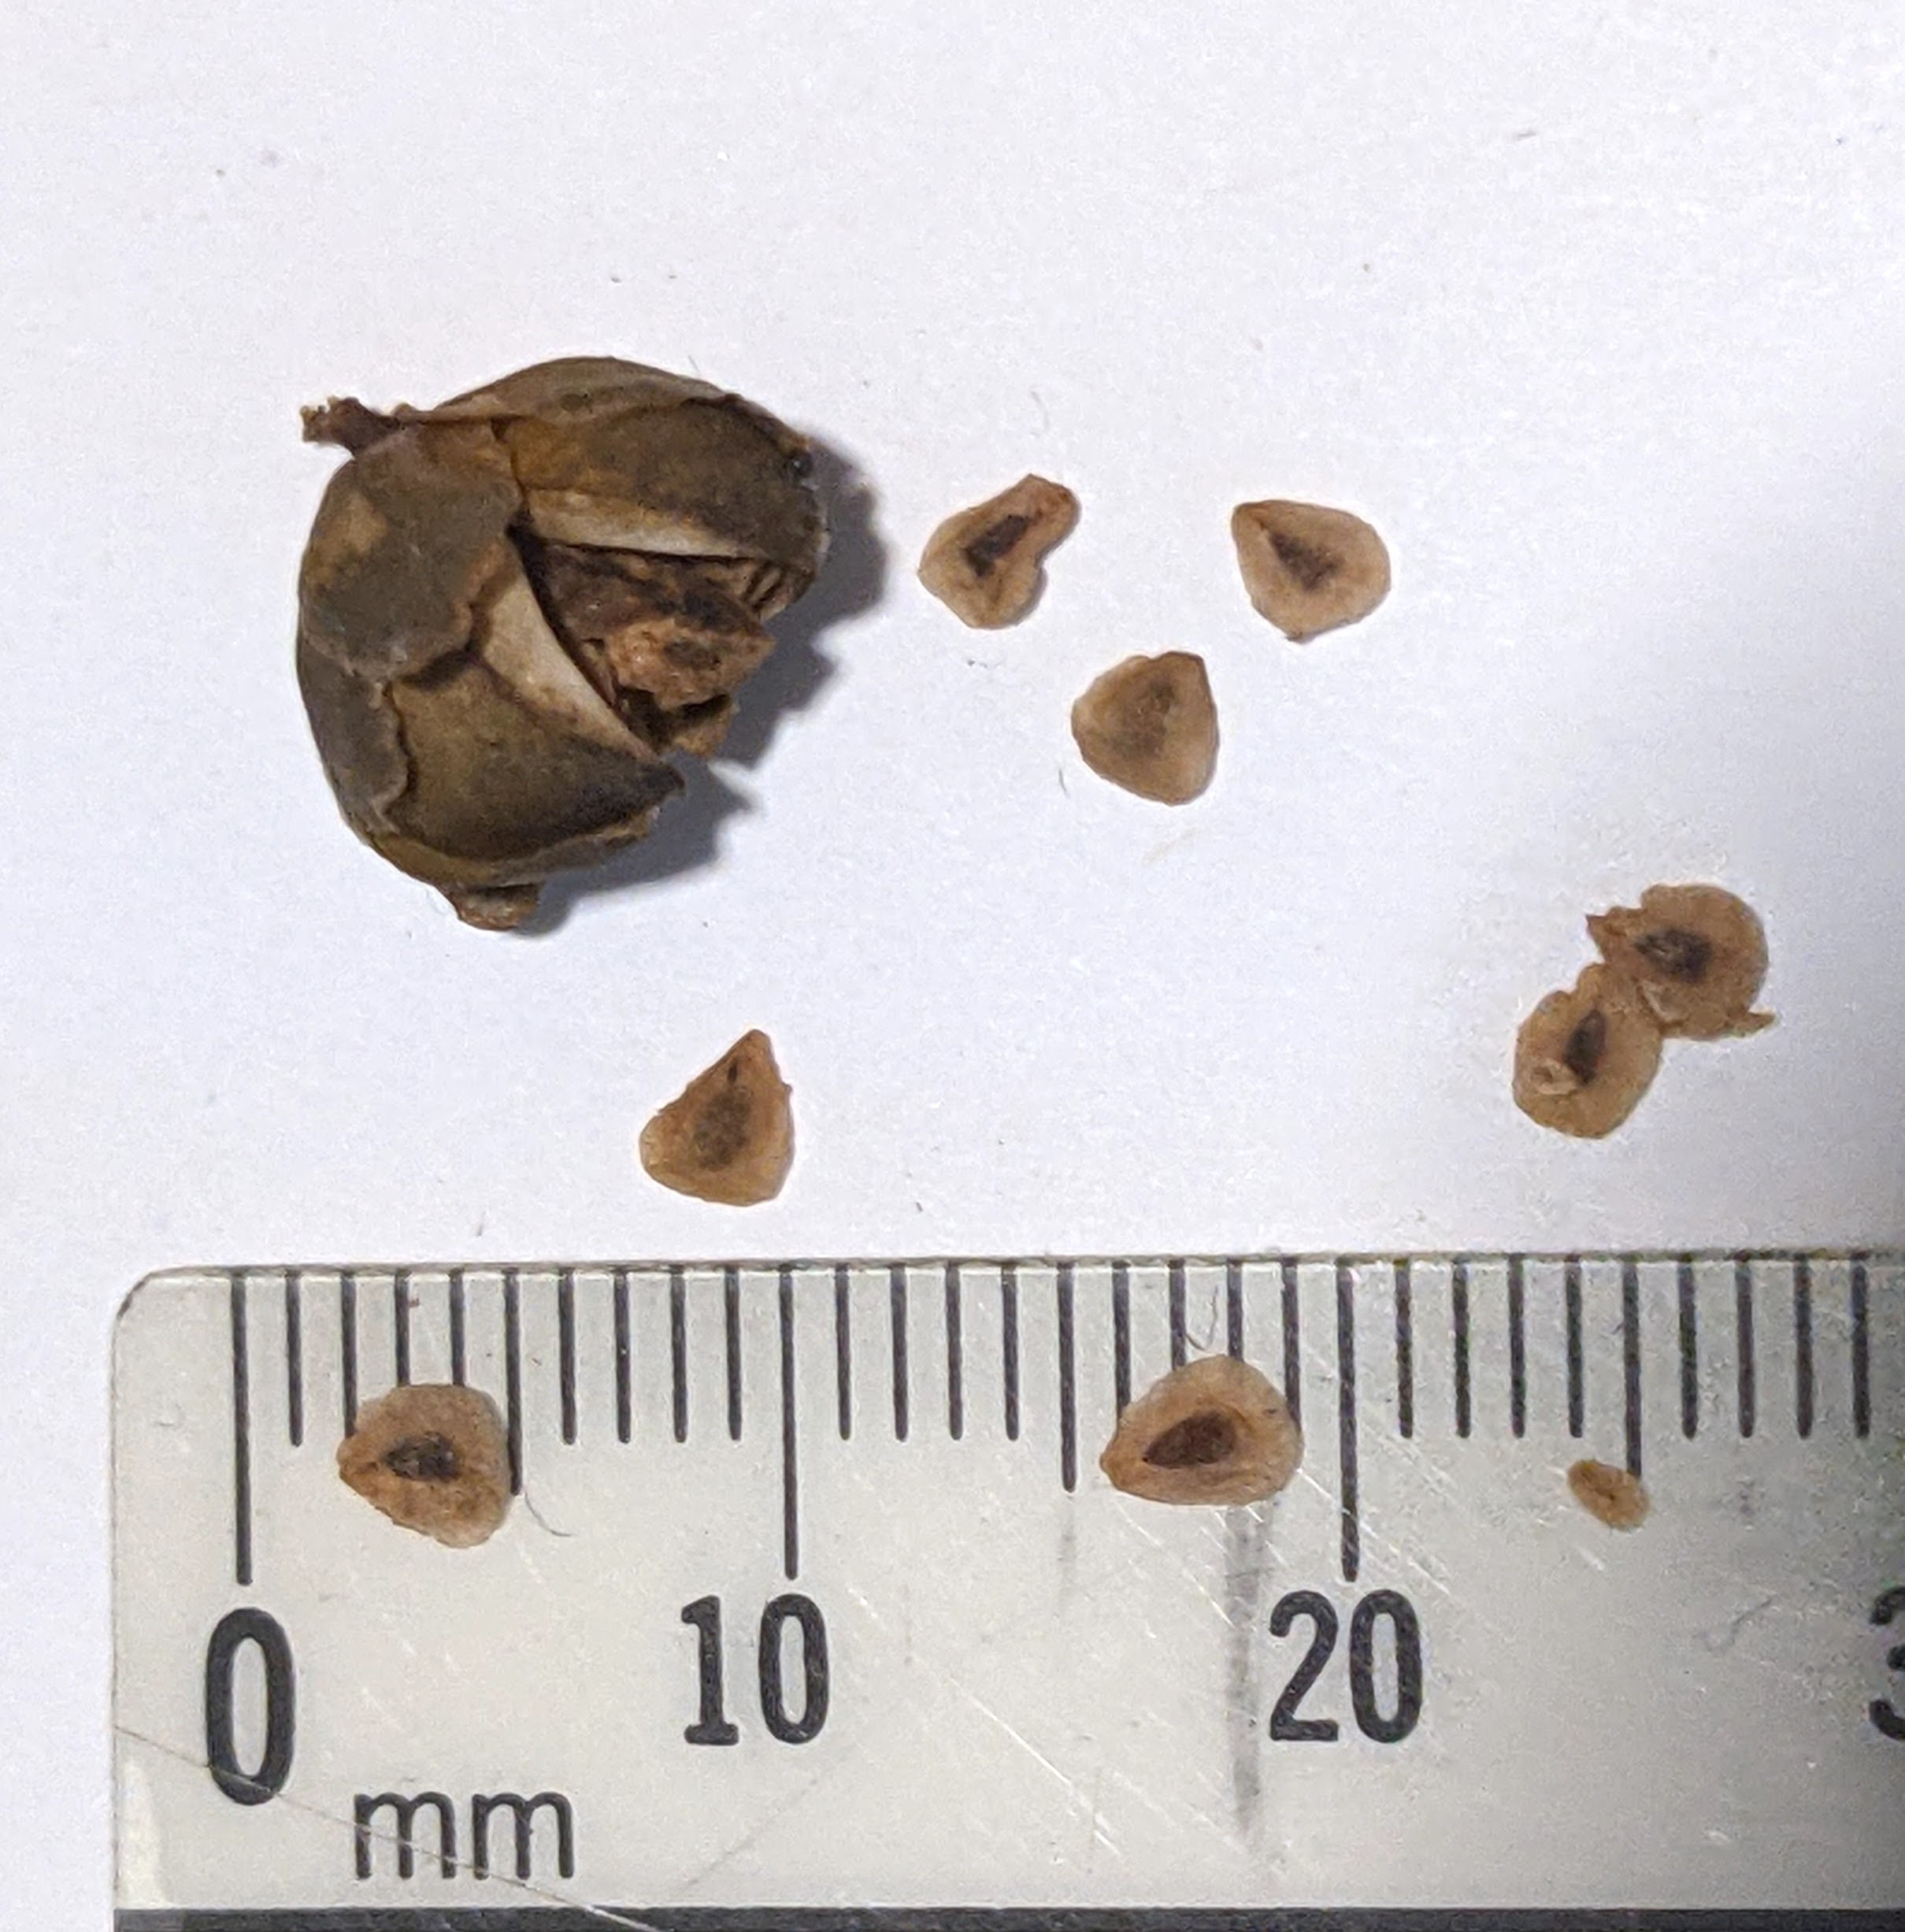 The Scientific Name is Chelone glabra. You will likely hear them called White Turtlehead. This picture shows the Oval seed capsule containing several seeds that are flattened and broadly winged. of Chelone glabra